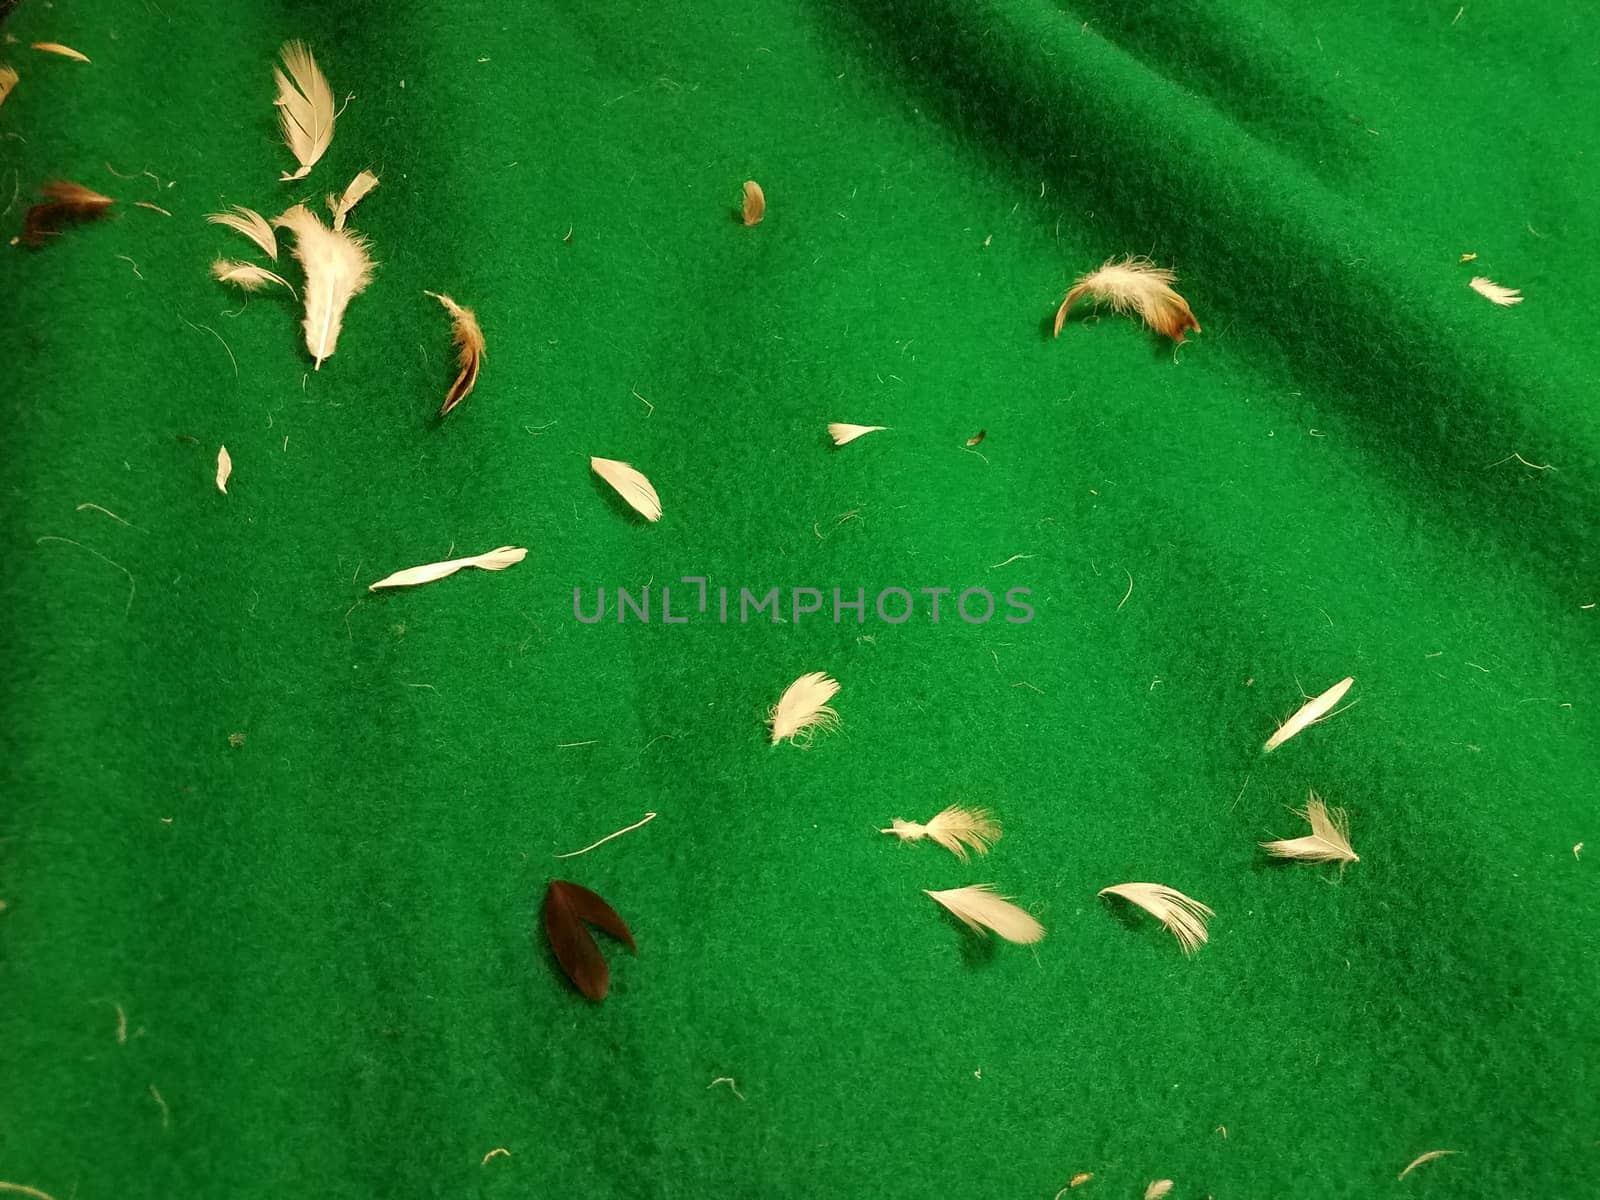 green fabric or textile with white feathers by stockphotofan1